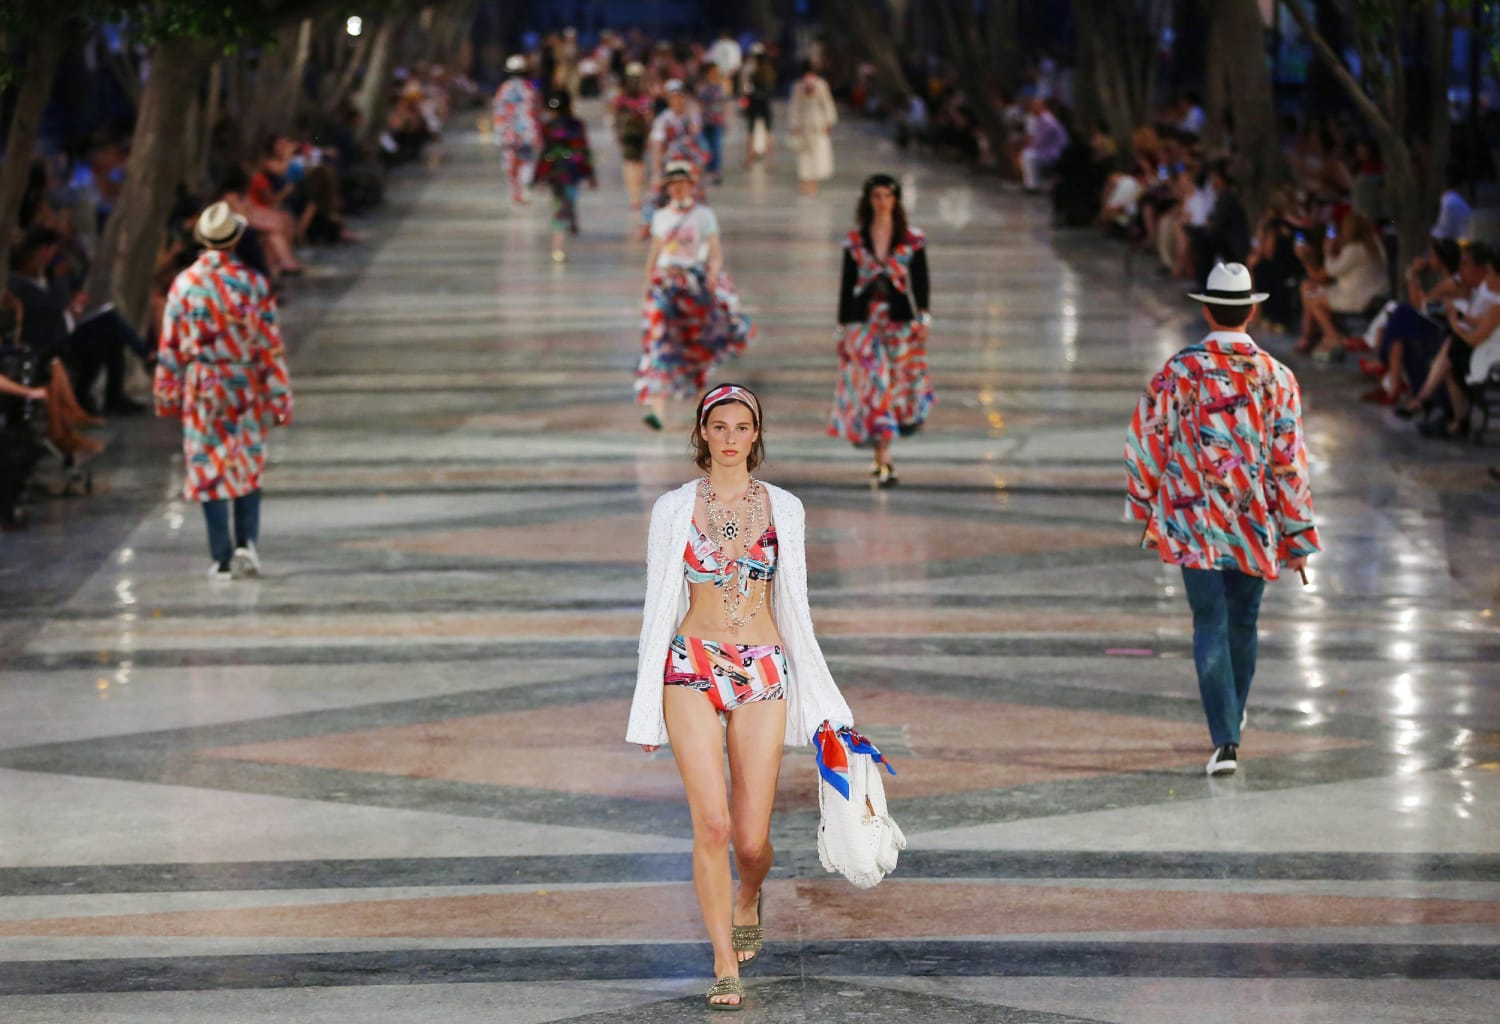 Fashionistas Invade Cuba for Chanel's Latest Collection